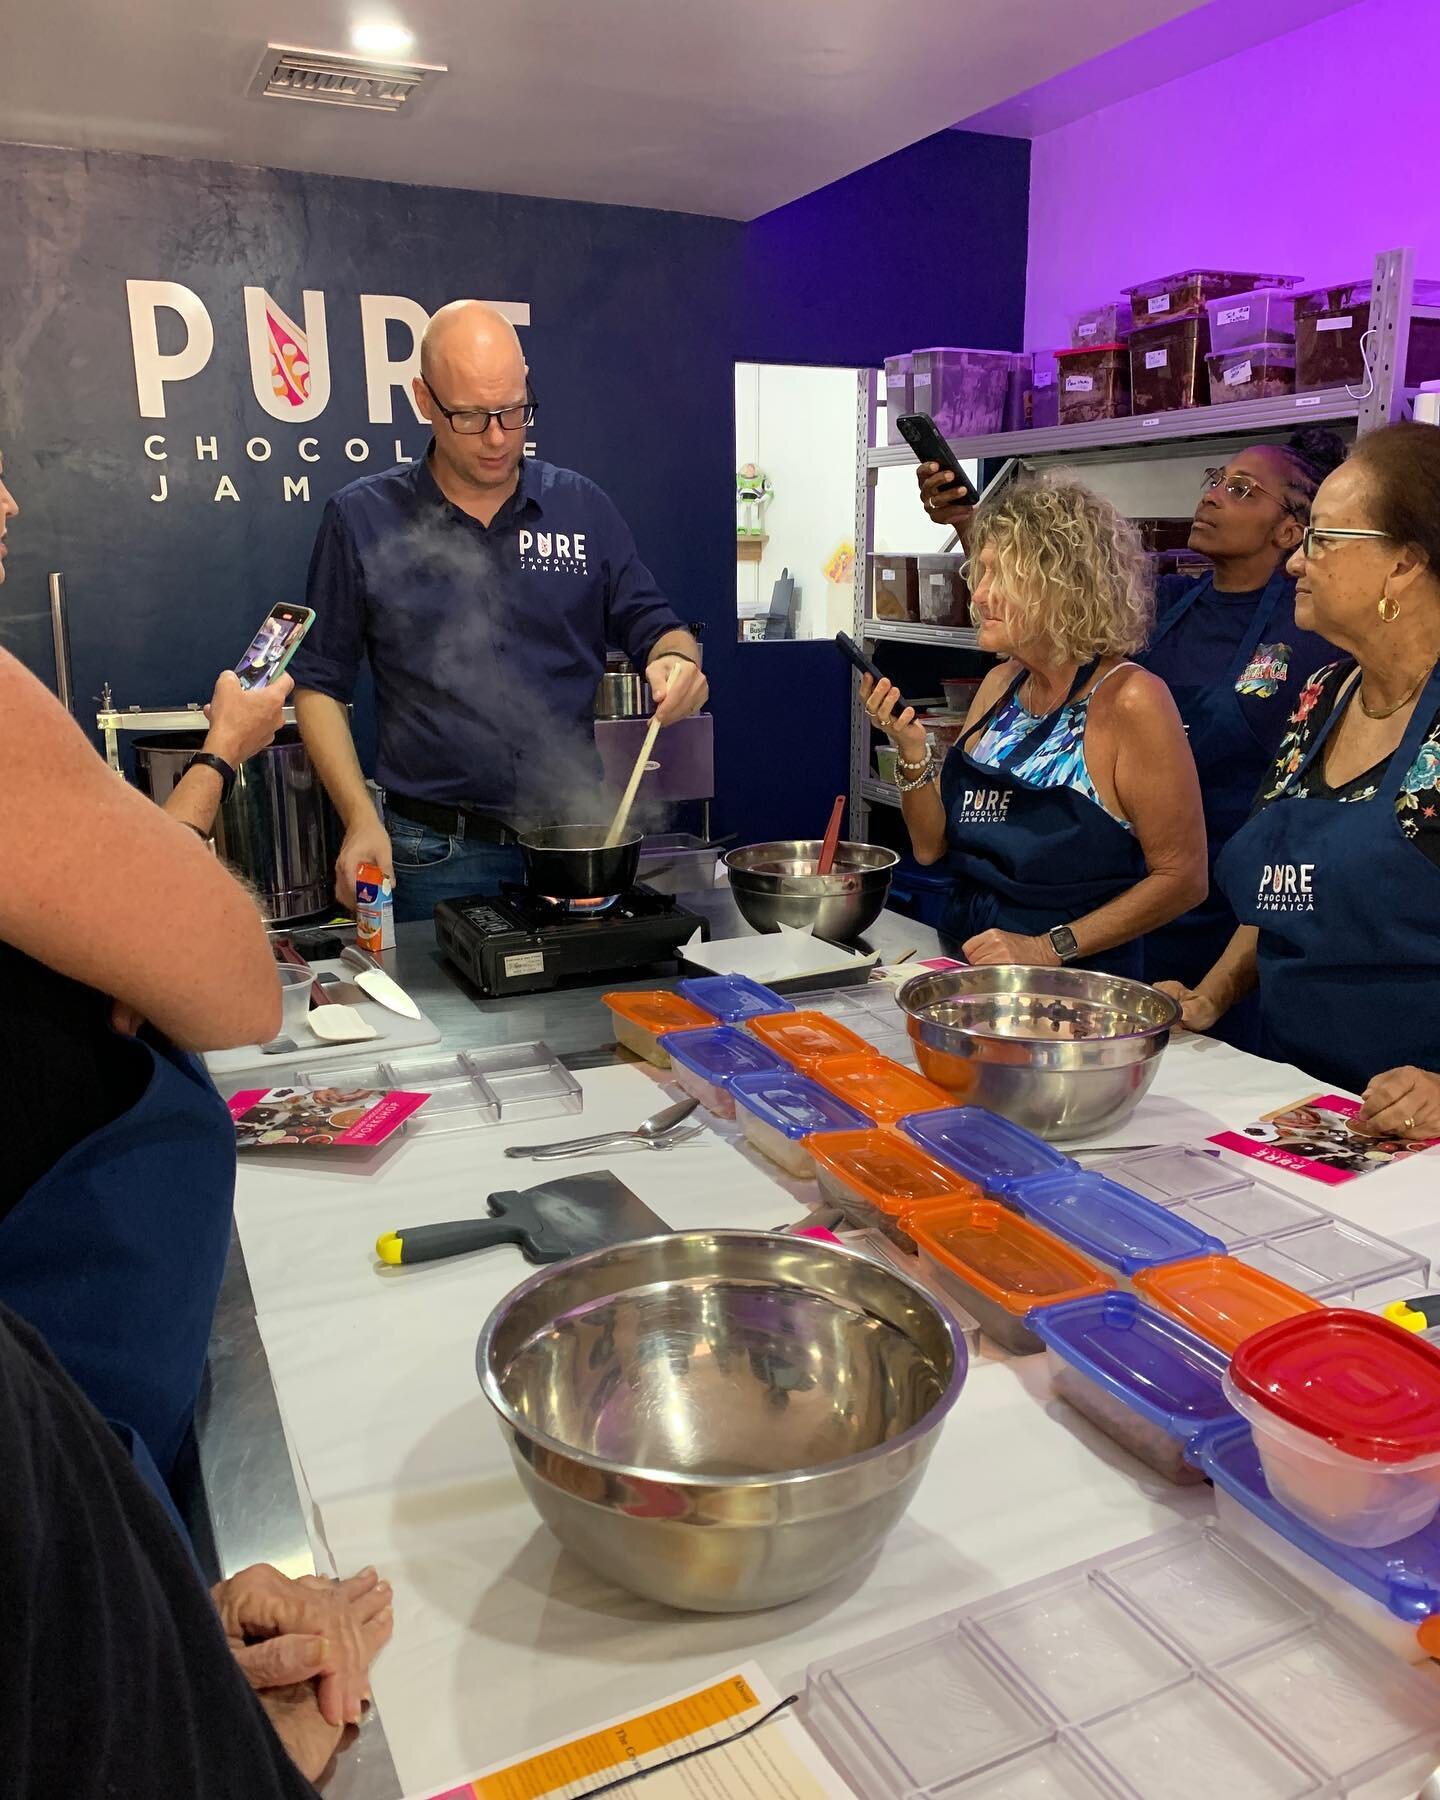 Thanks to Rennae and Wouter for a wonderful workshop at @purechocolatecompany in #ochorios - informative, fun and totally delicious 🥰.
.
.
@chillywitch876 
@jamaica8 
@jannetteeyles